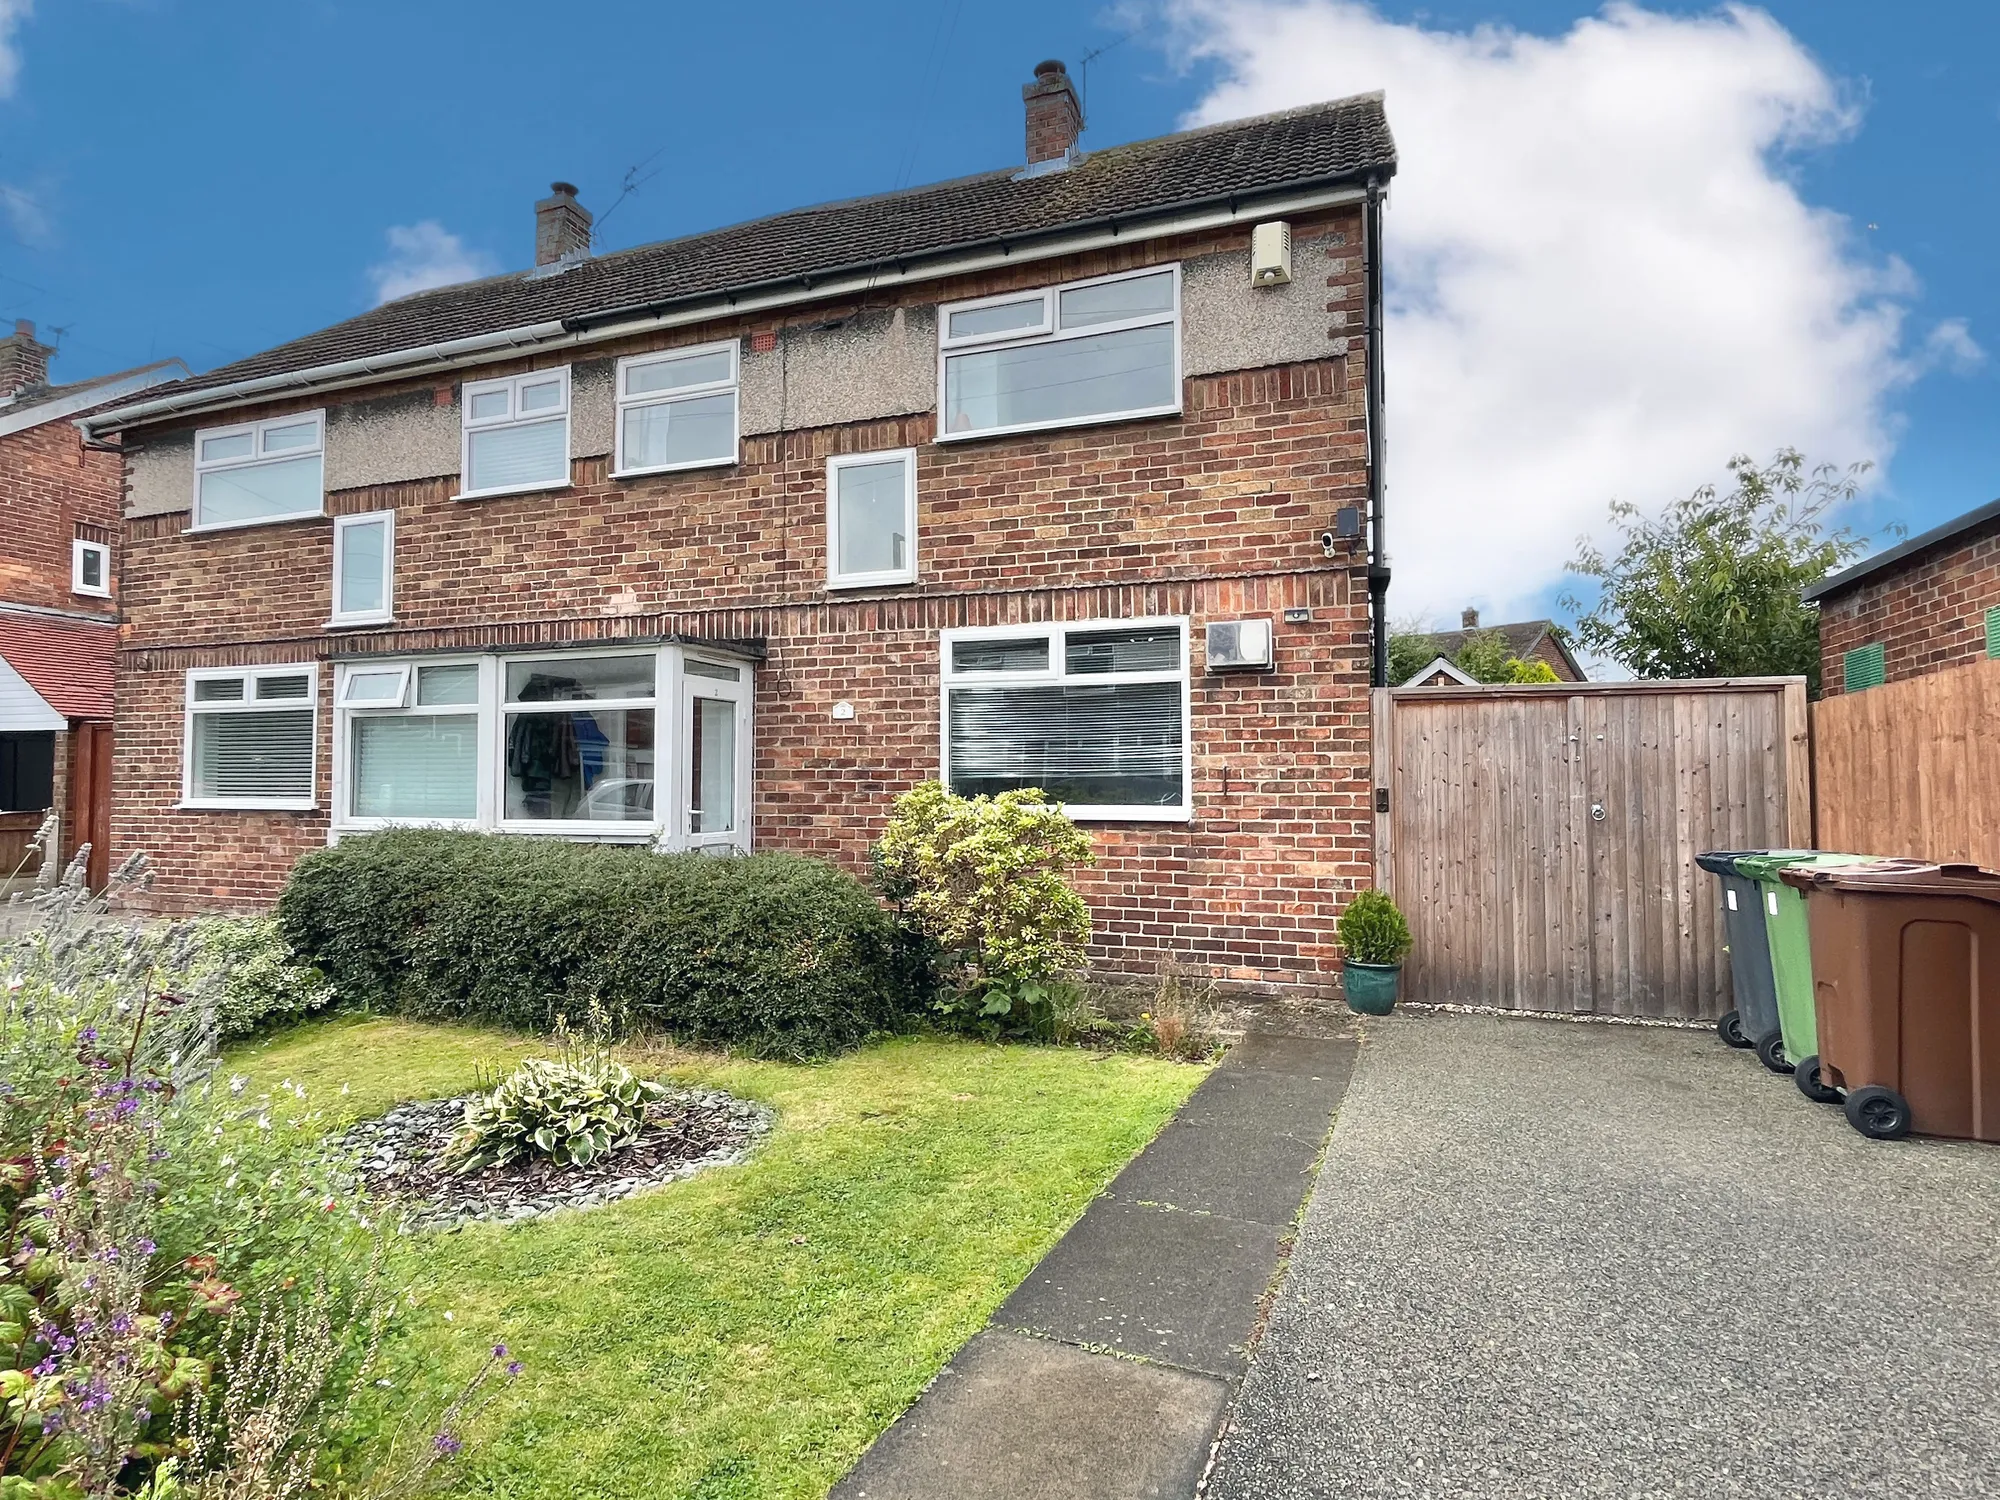 Fantastic three bedroom semi in a charming cul de sac in Maghull, right on the doorstep for walks in nature, and with a beautifully maintained secluded garden.